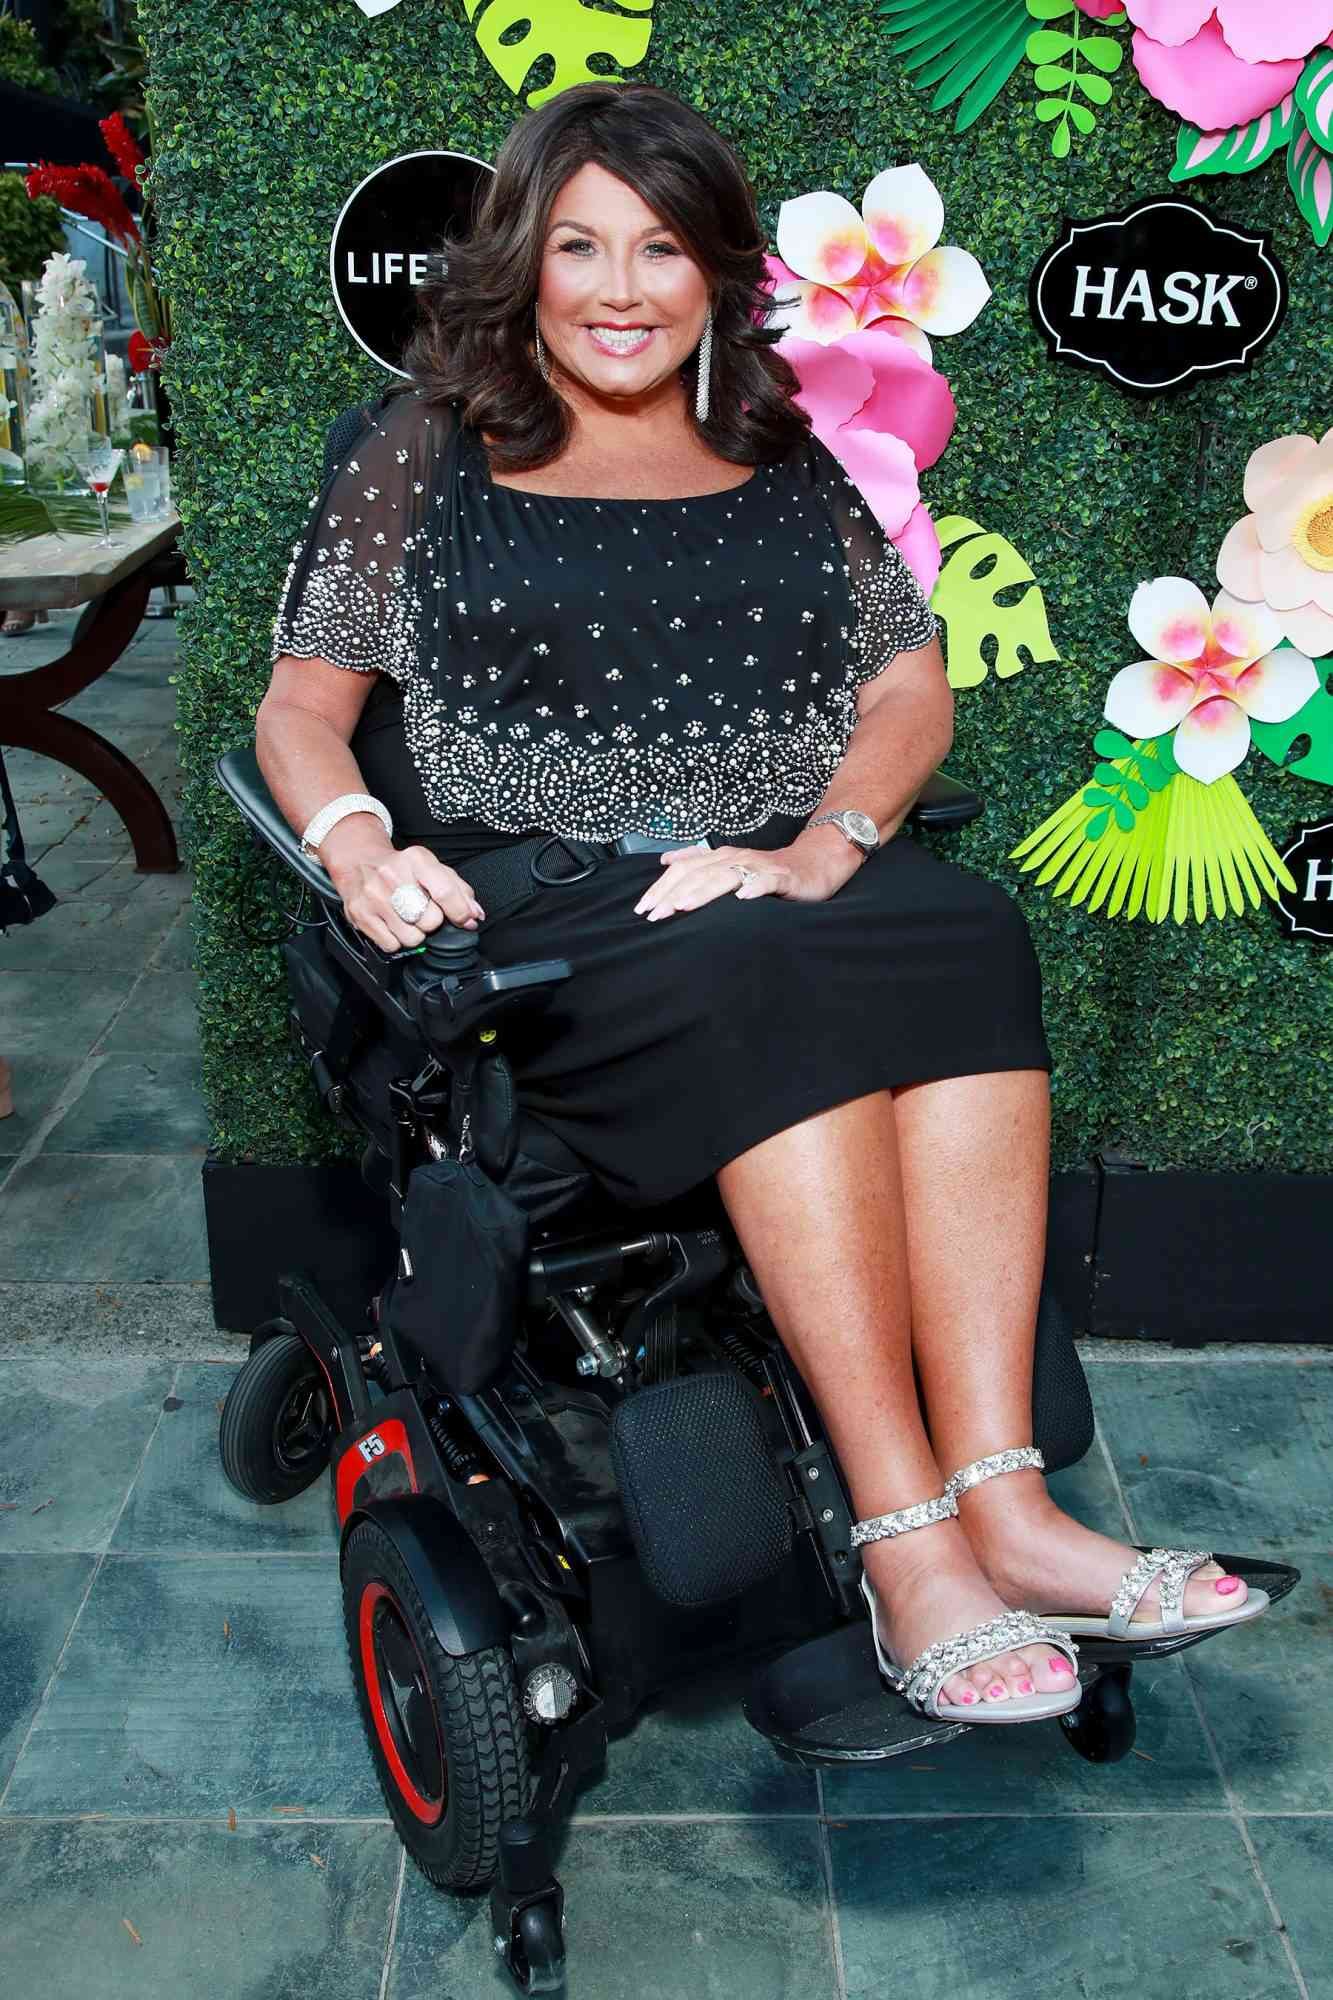 Abby Lee Miller Launching New Dance Reality Series 'Mad House